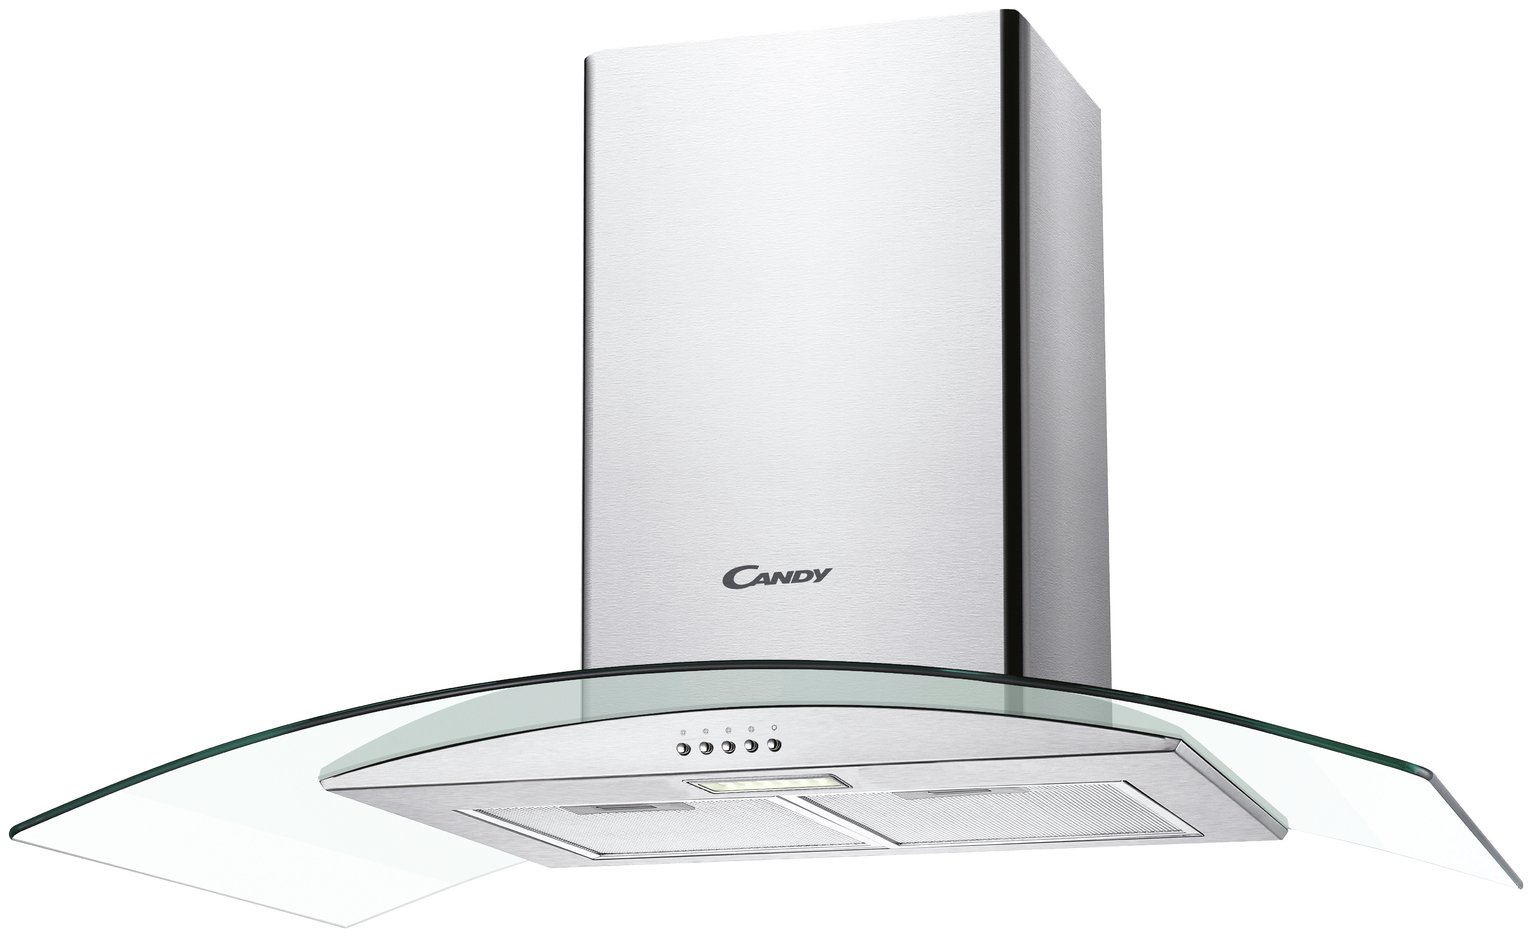 Candy CGM94/1X 90cm Cooker Hood - Stainless Steel